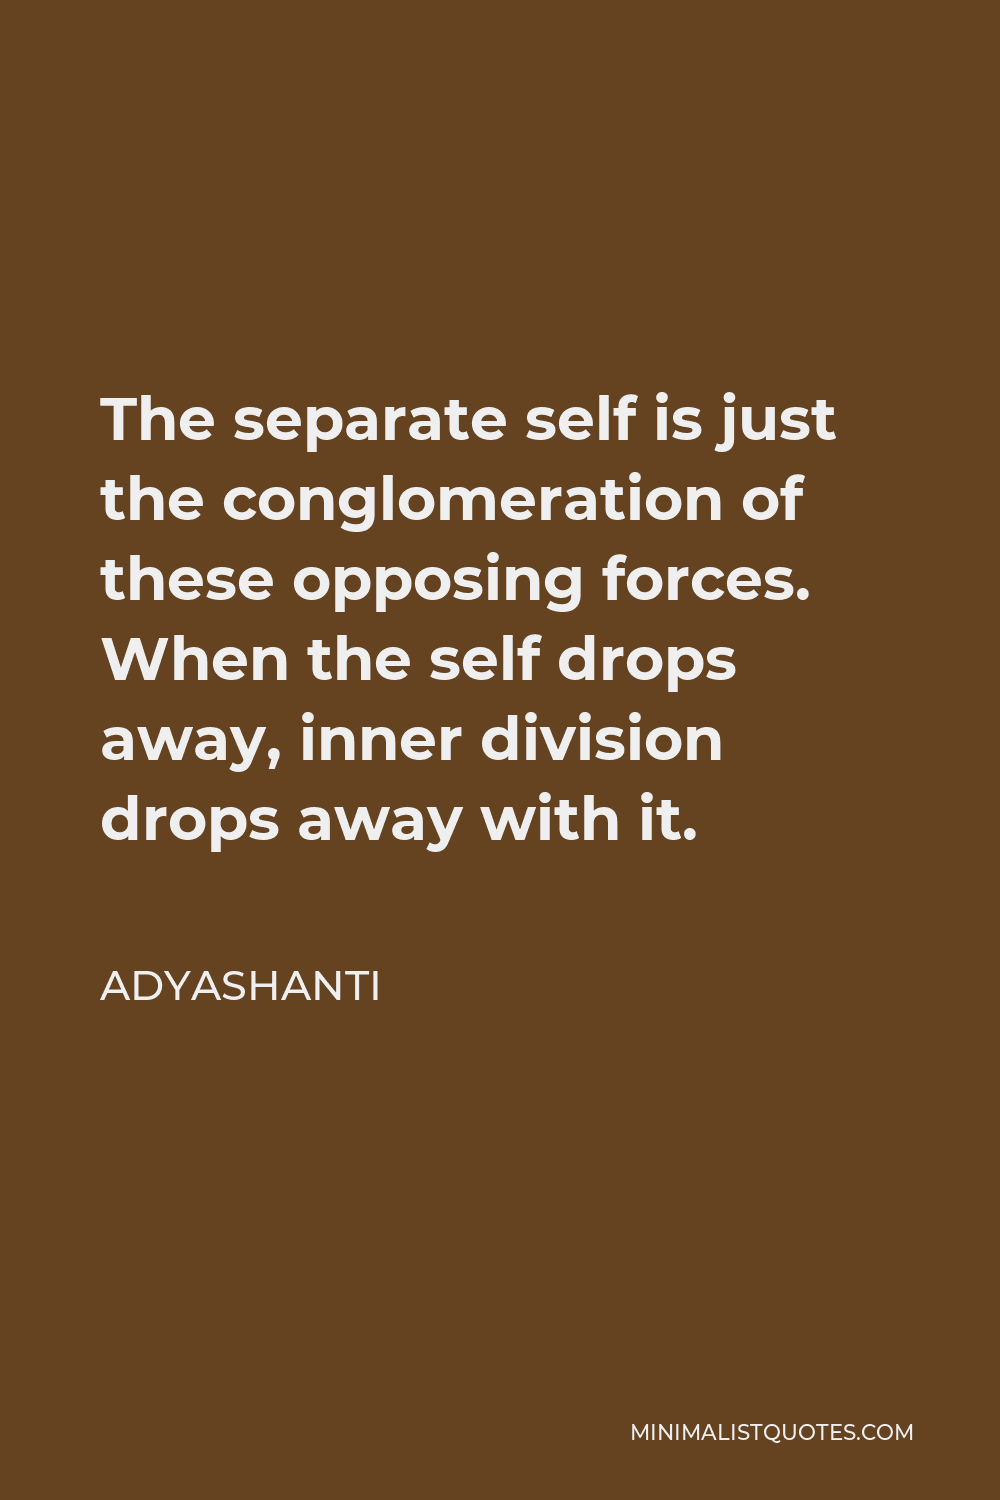 Adyashanti Quote - The separate self is just the conglomeration of these opposing forces. When the self drops away, inner division drops away with it.